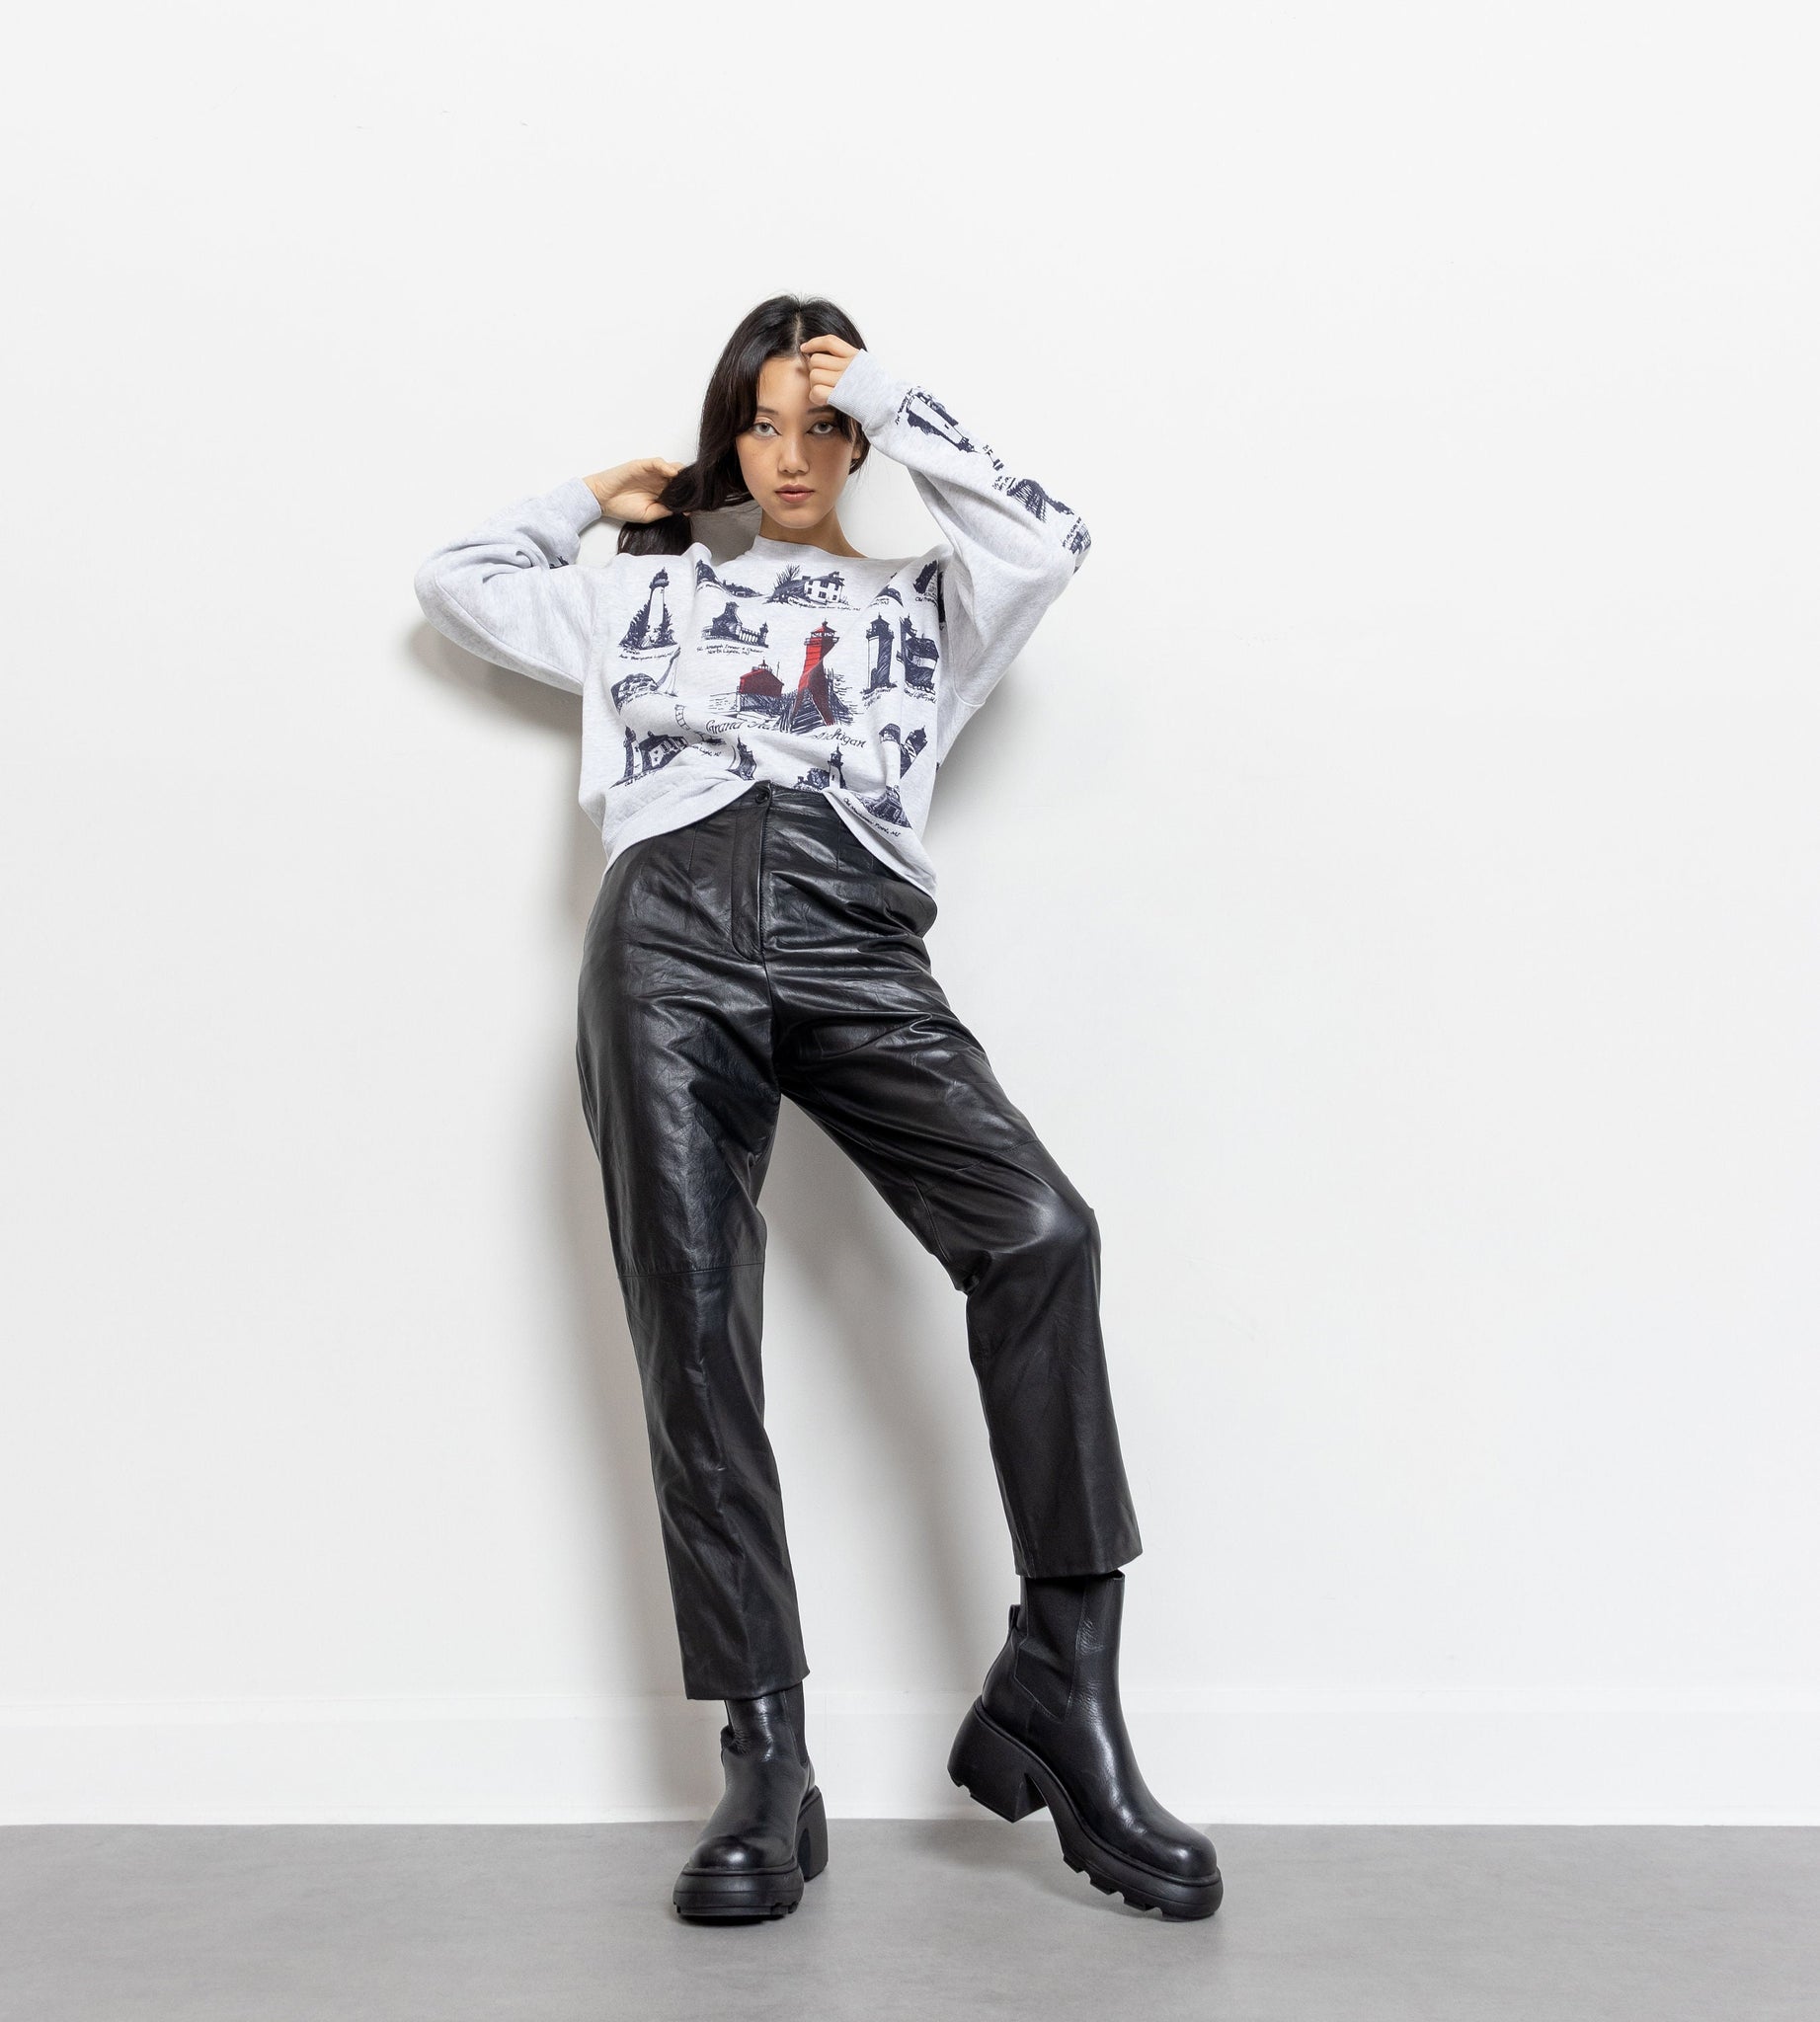 Vintage Black Leather Trousers For Women – Better Stay Together